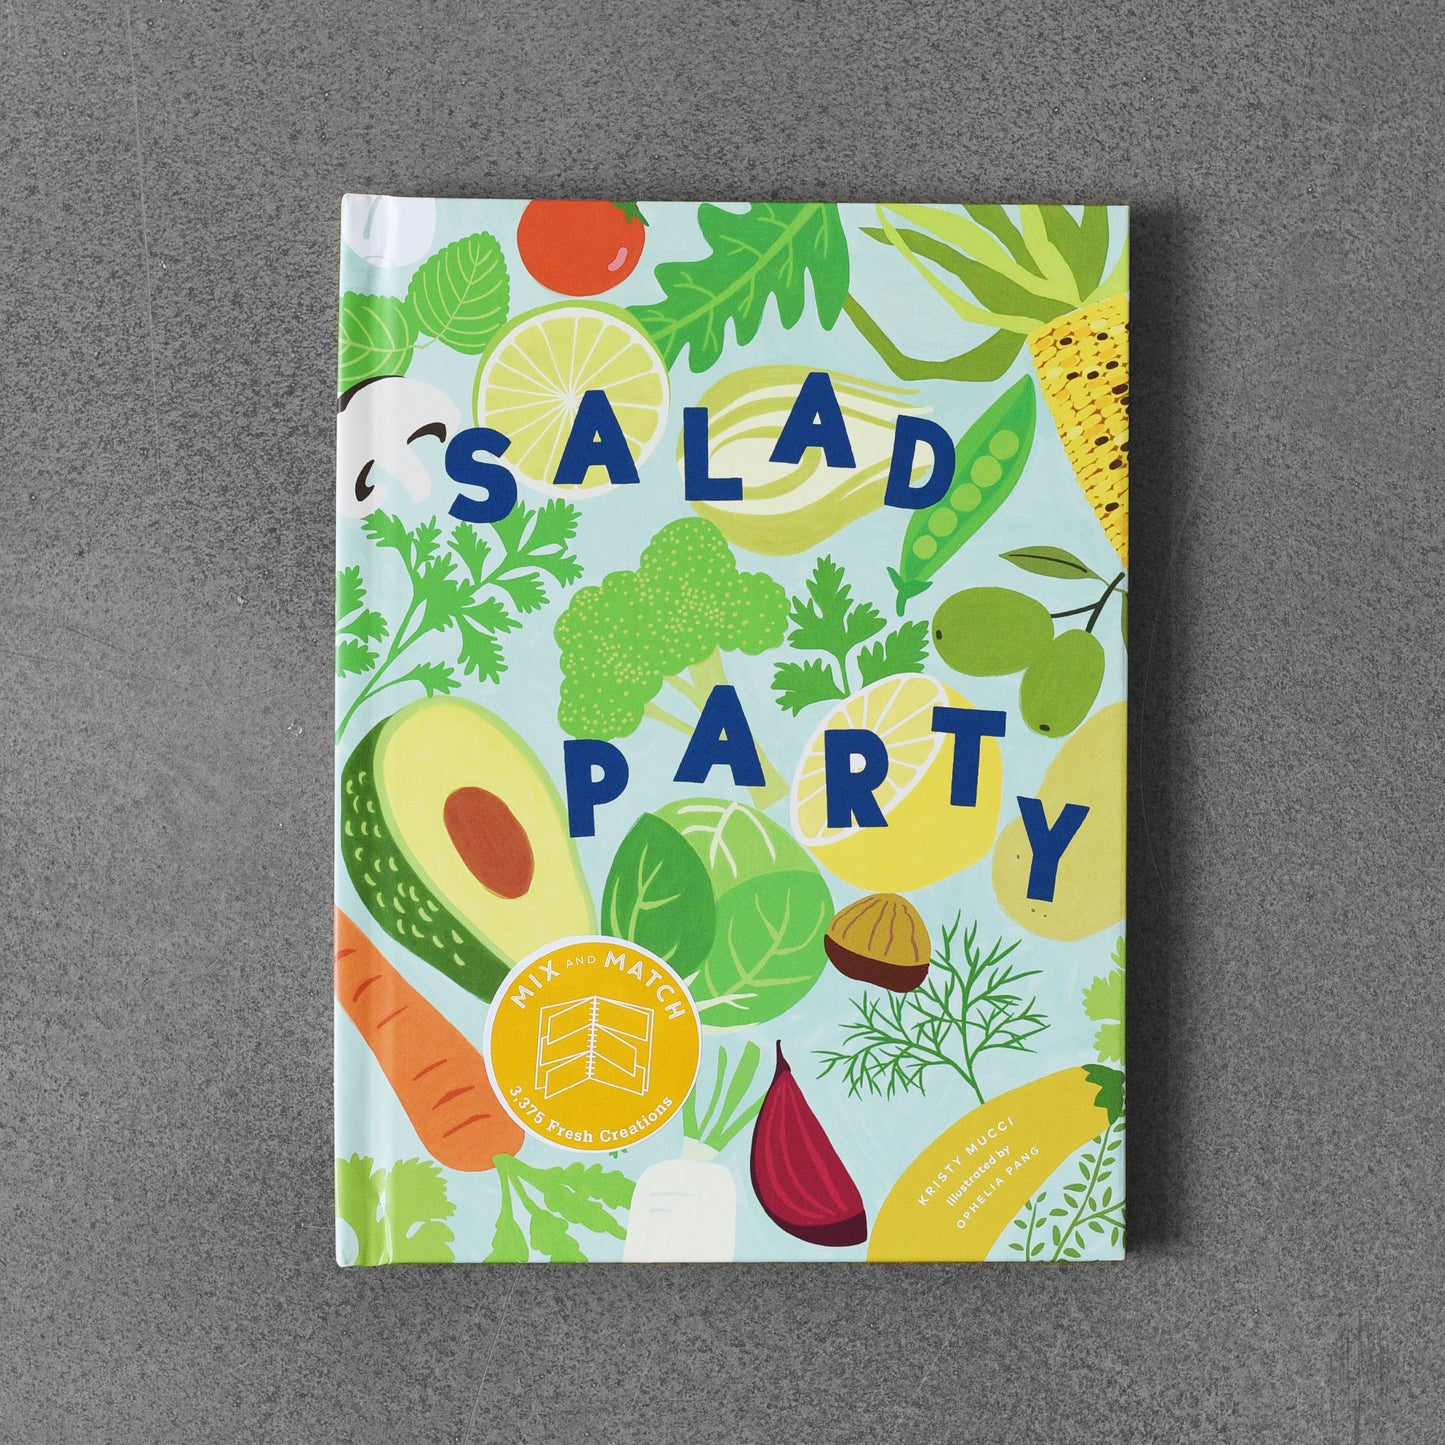 Salad Party: Mix and Match to Make 3375 Fresh Creations